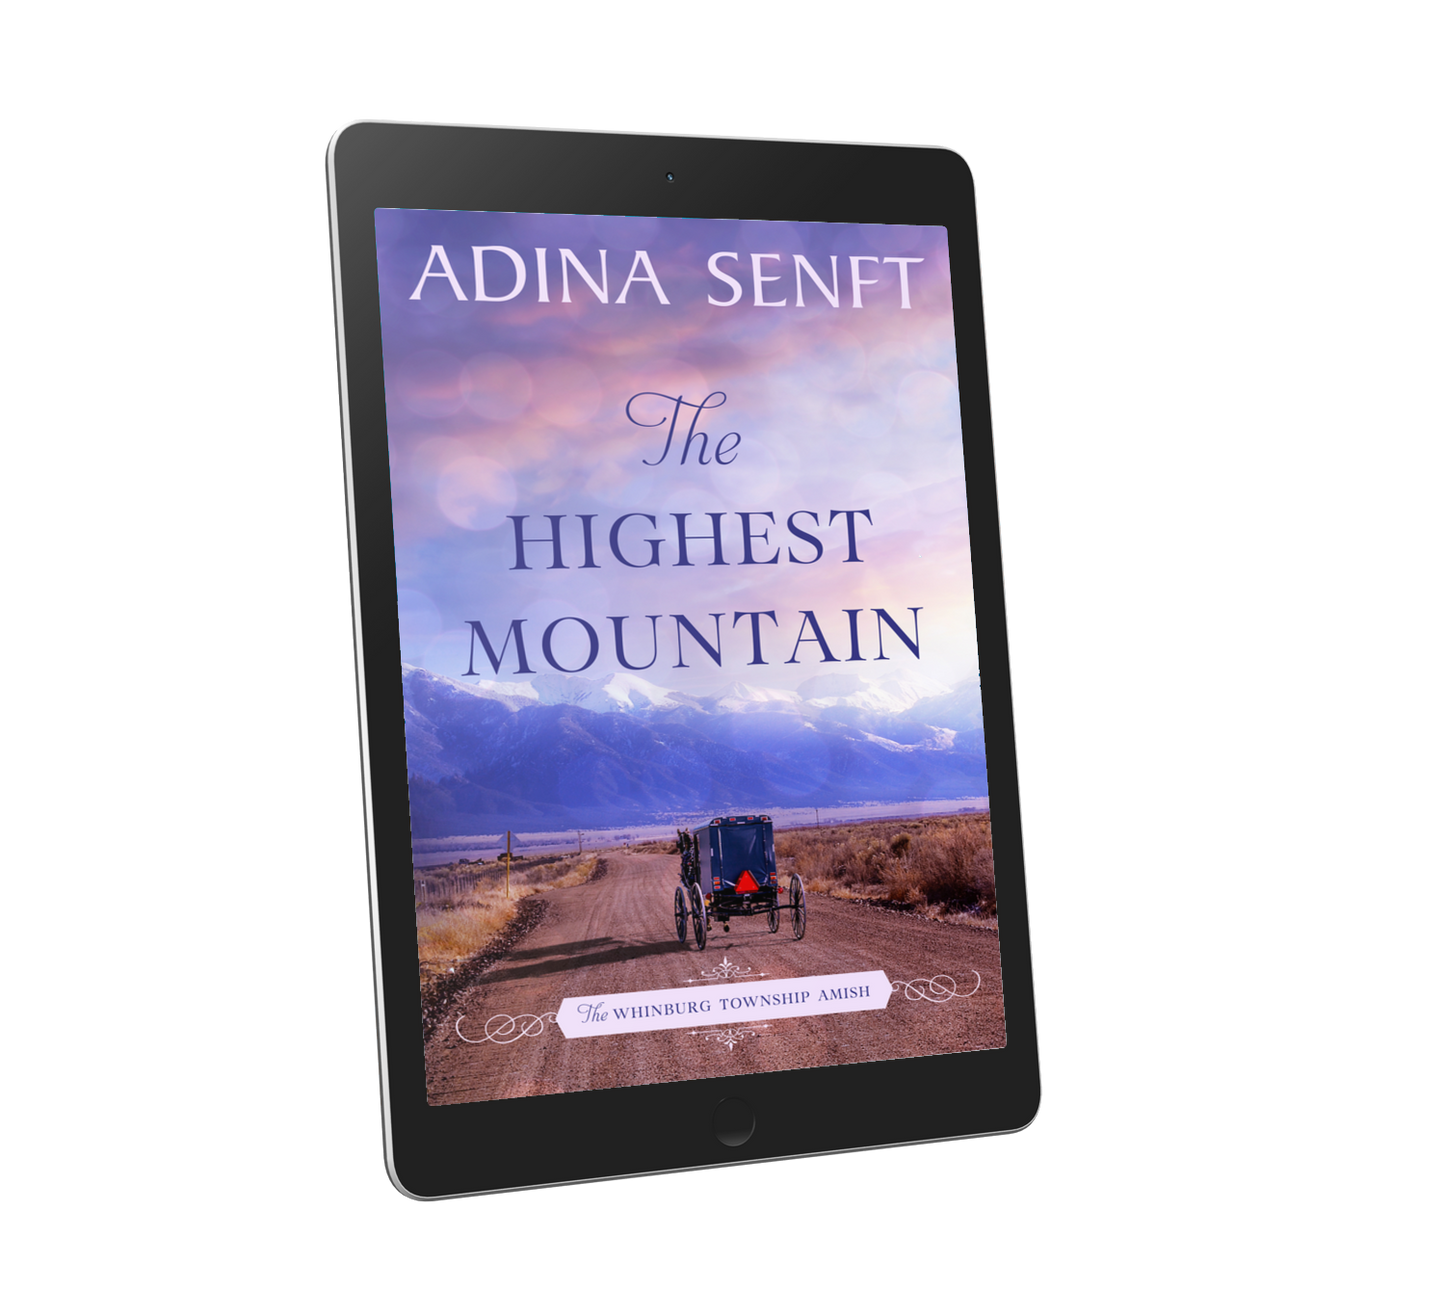 The Highest Mountain by Adina Senft, book 8 in The Whinburg Township Amish series